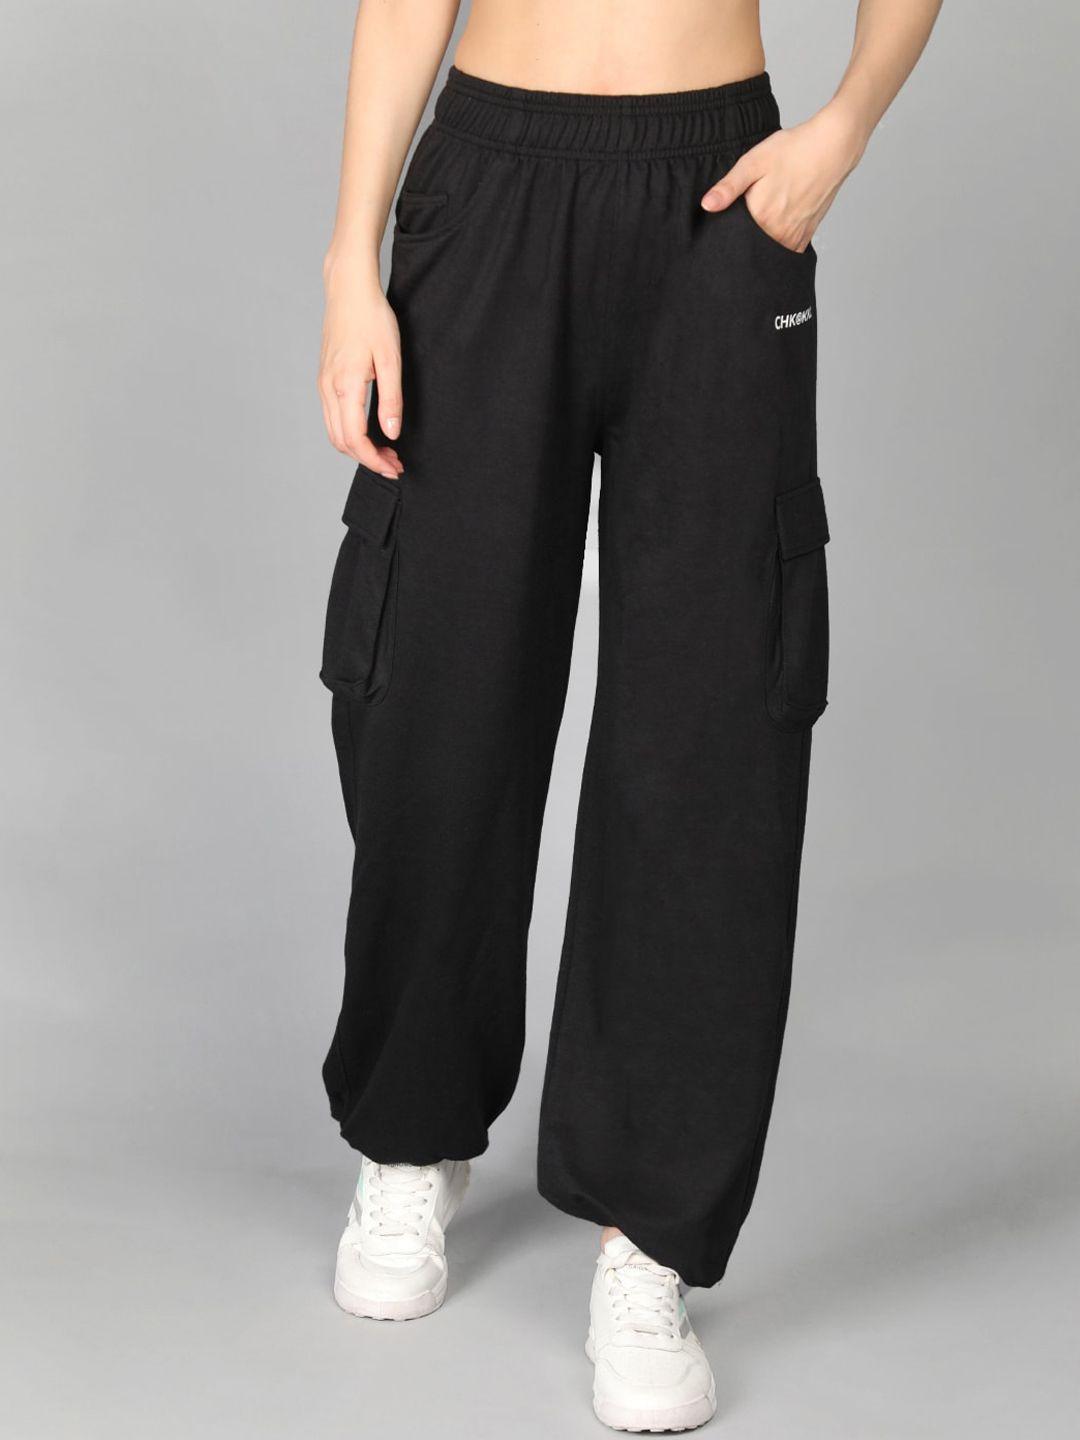 chkokko women black solid relaxed-fit track pants